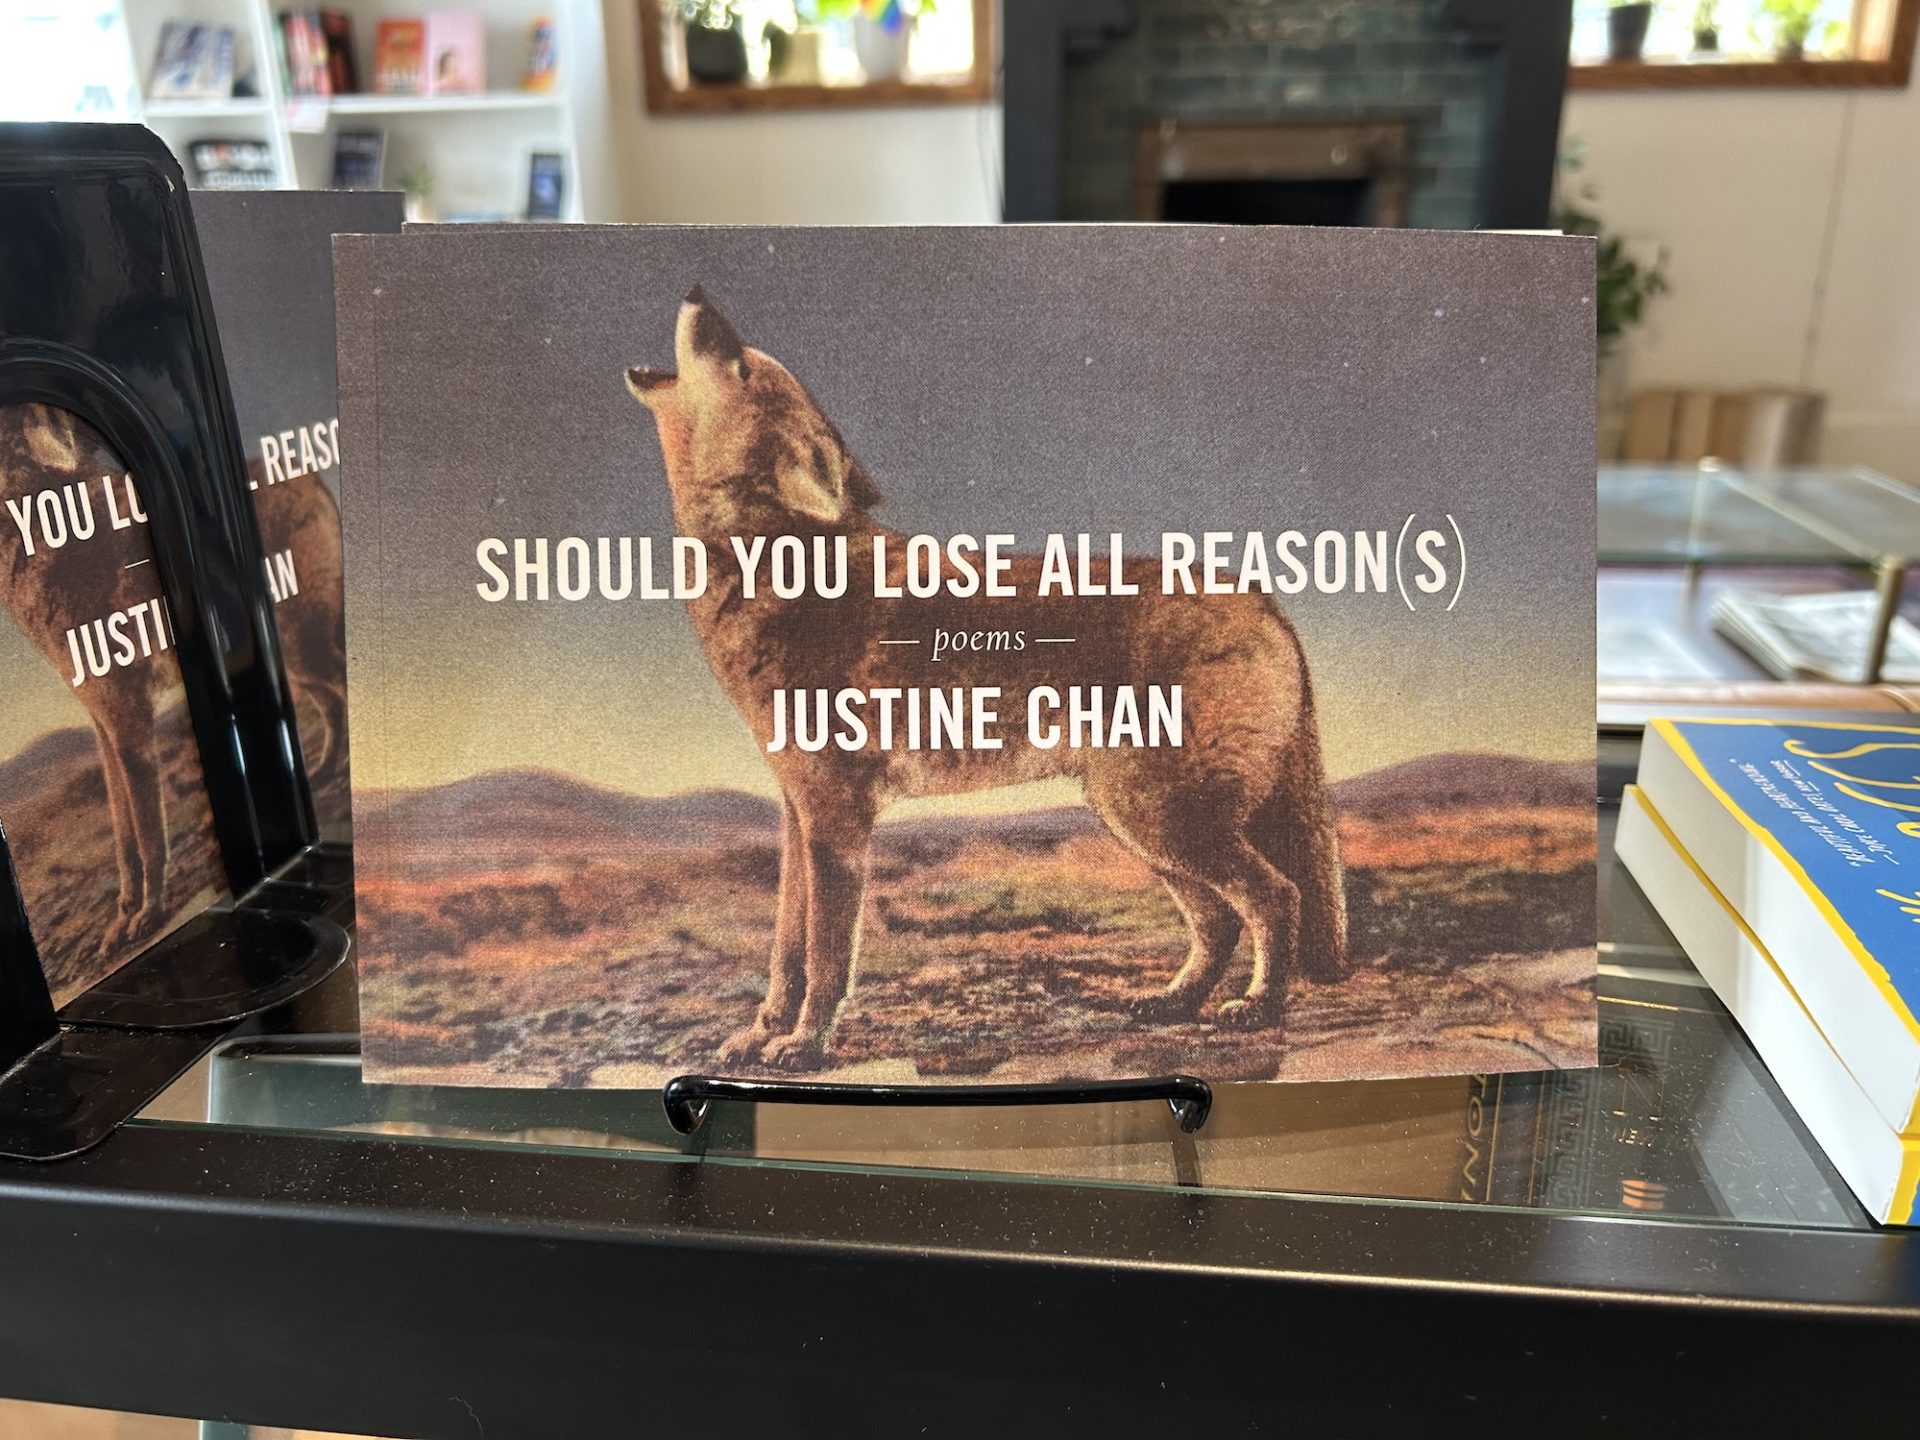 U of I alum and poet Justine Chan is a featured author at The Literary